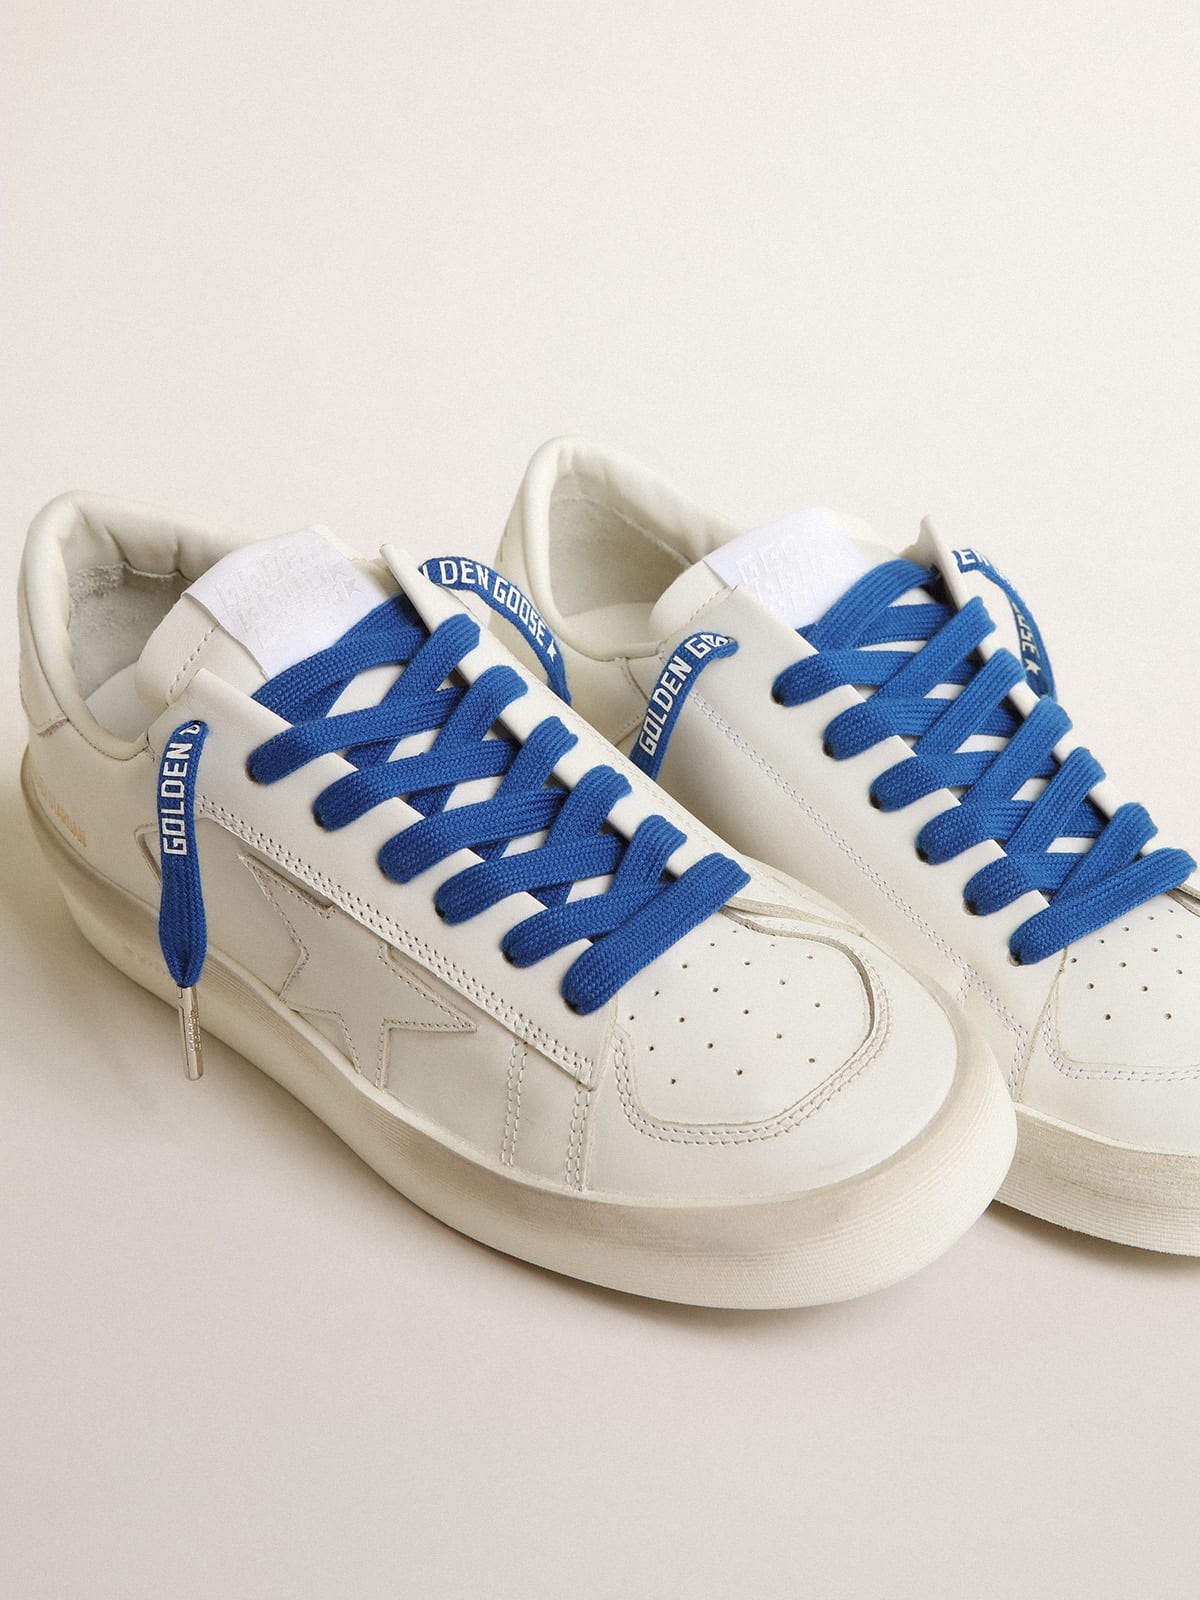 Golden Goose - Blue cotton laces with contrasting white logo in 